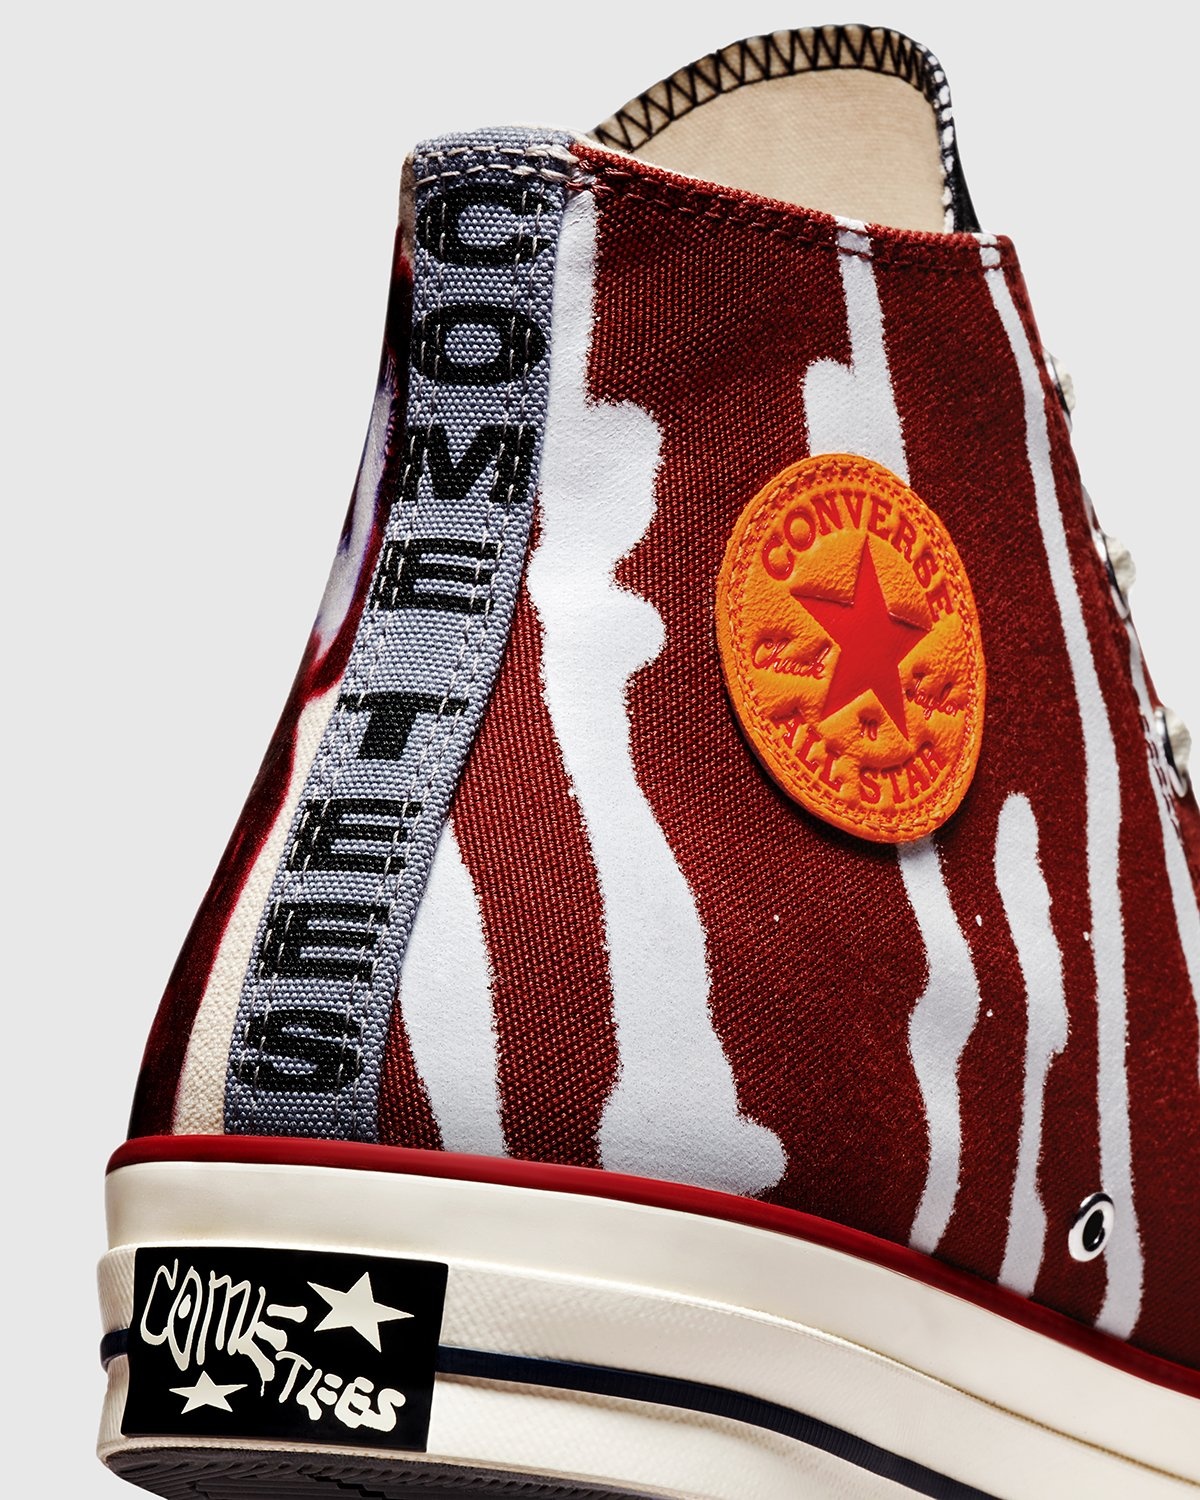 Converse x Come Tees – Chuck 70 Hi White/Multi/Egret - High Top Sneakers - Red - Image 5